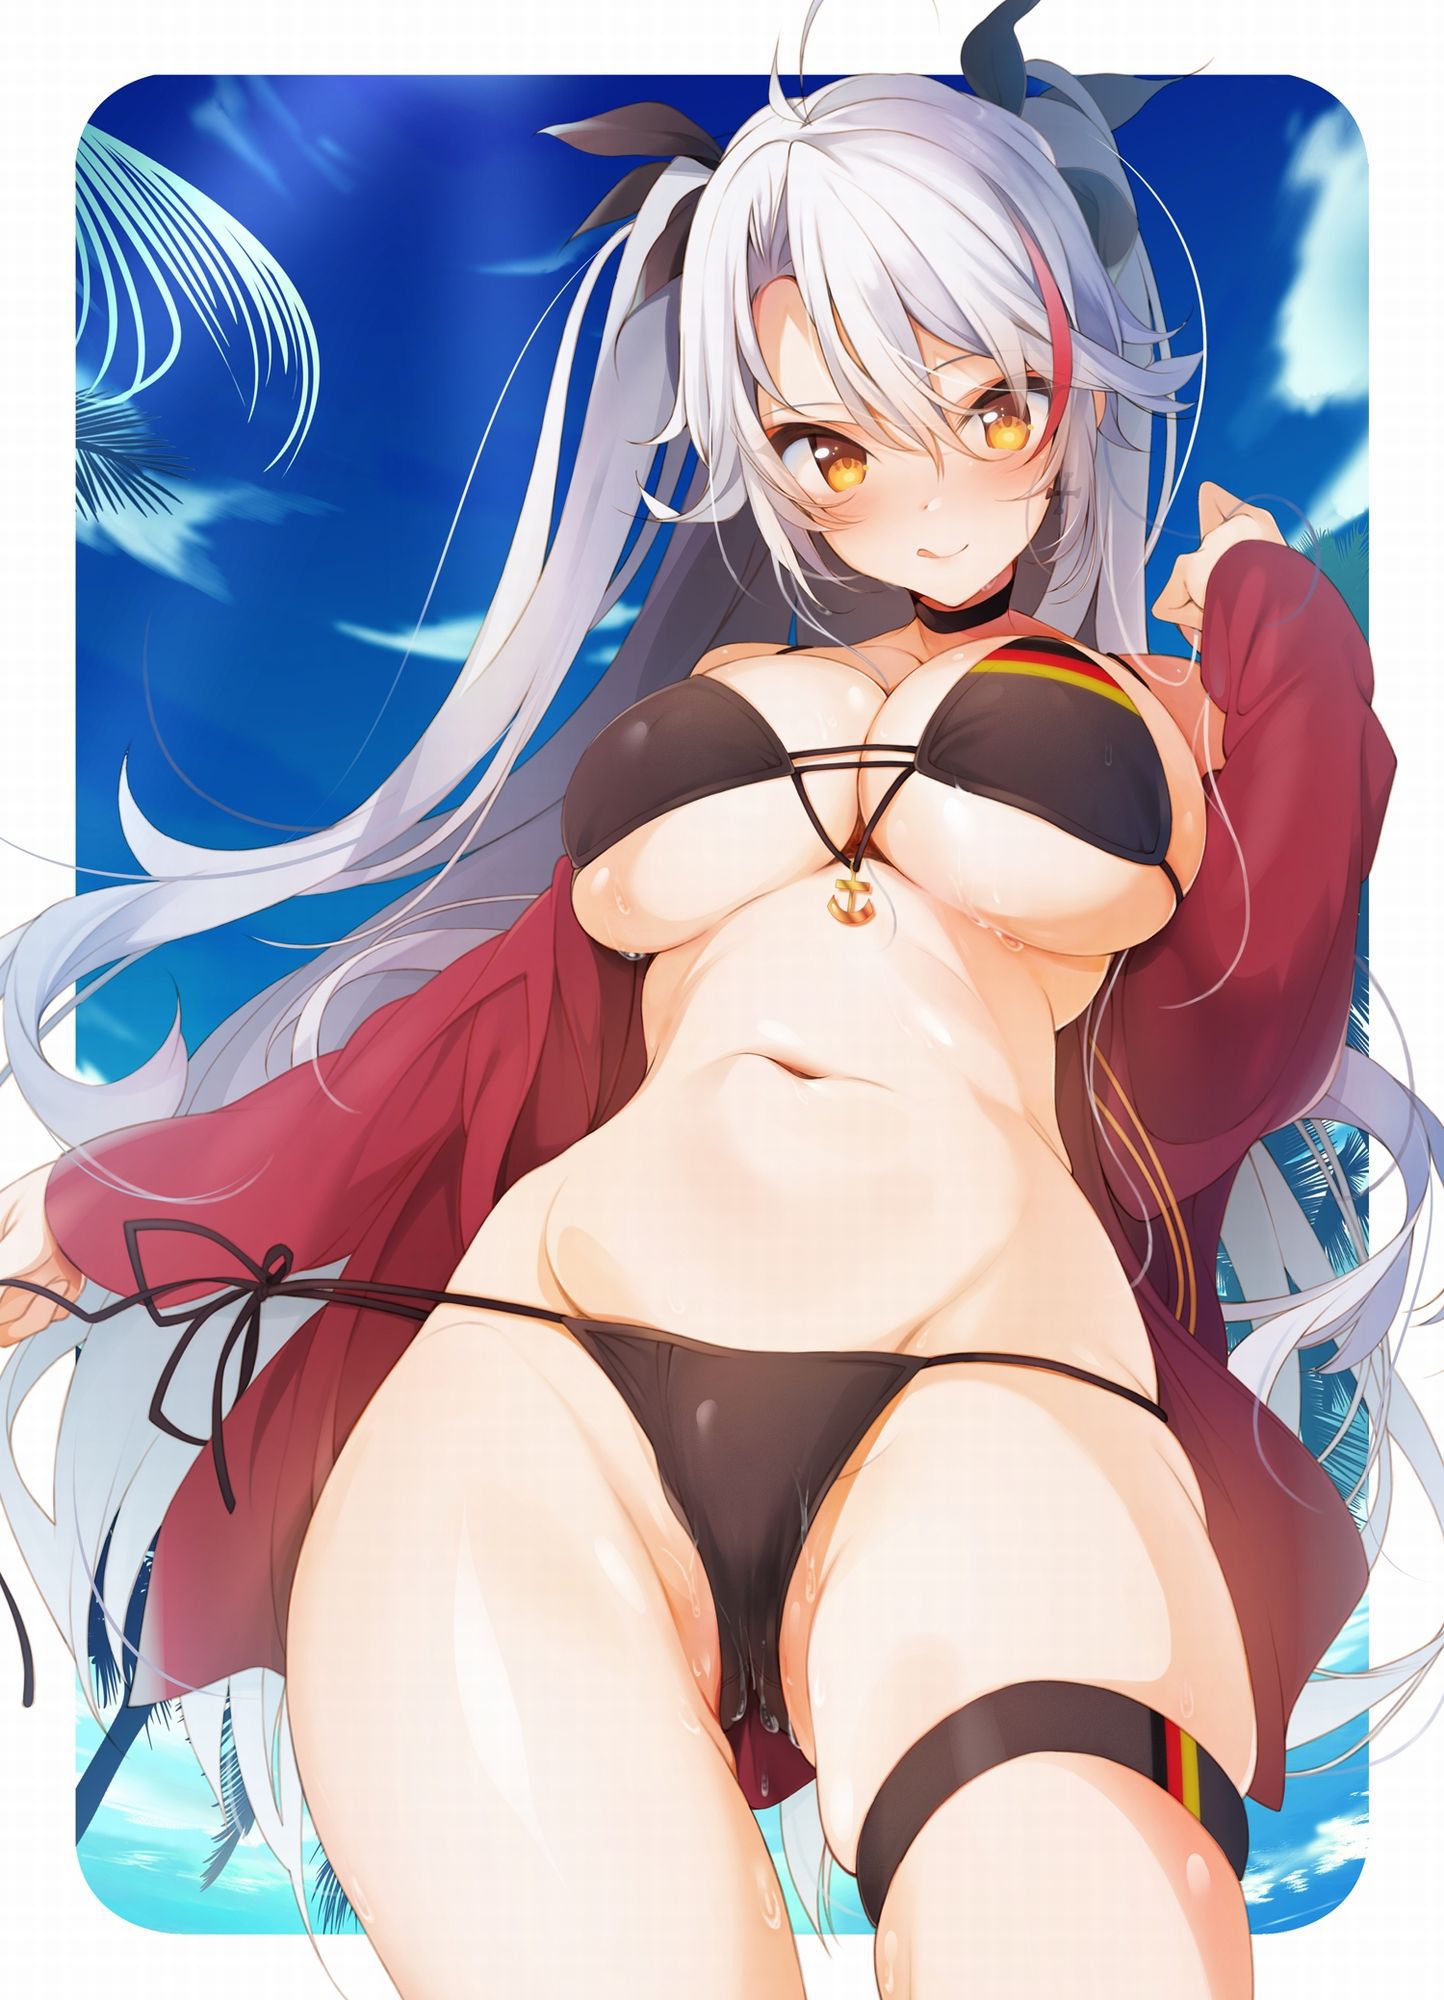 【Azur Lane】High-quality erotic images that can be made into Prinz Eugen wallpaper (PC / smartphone) 17